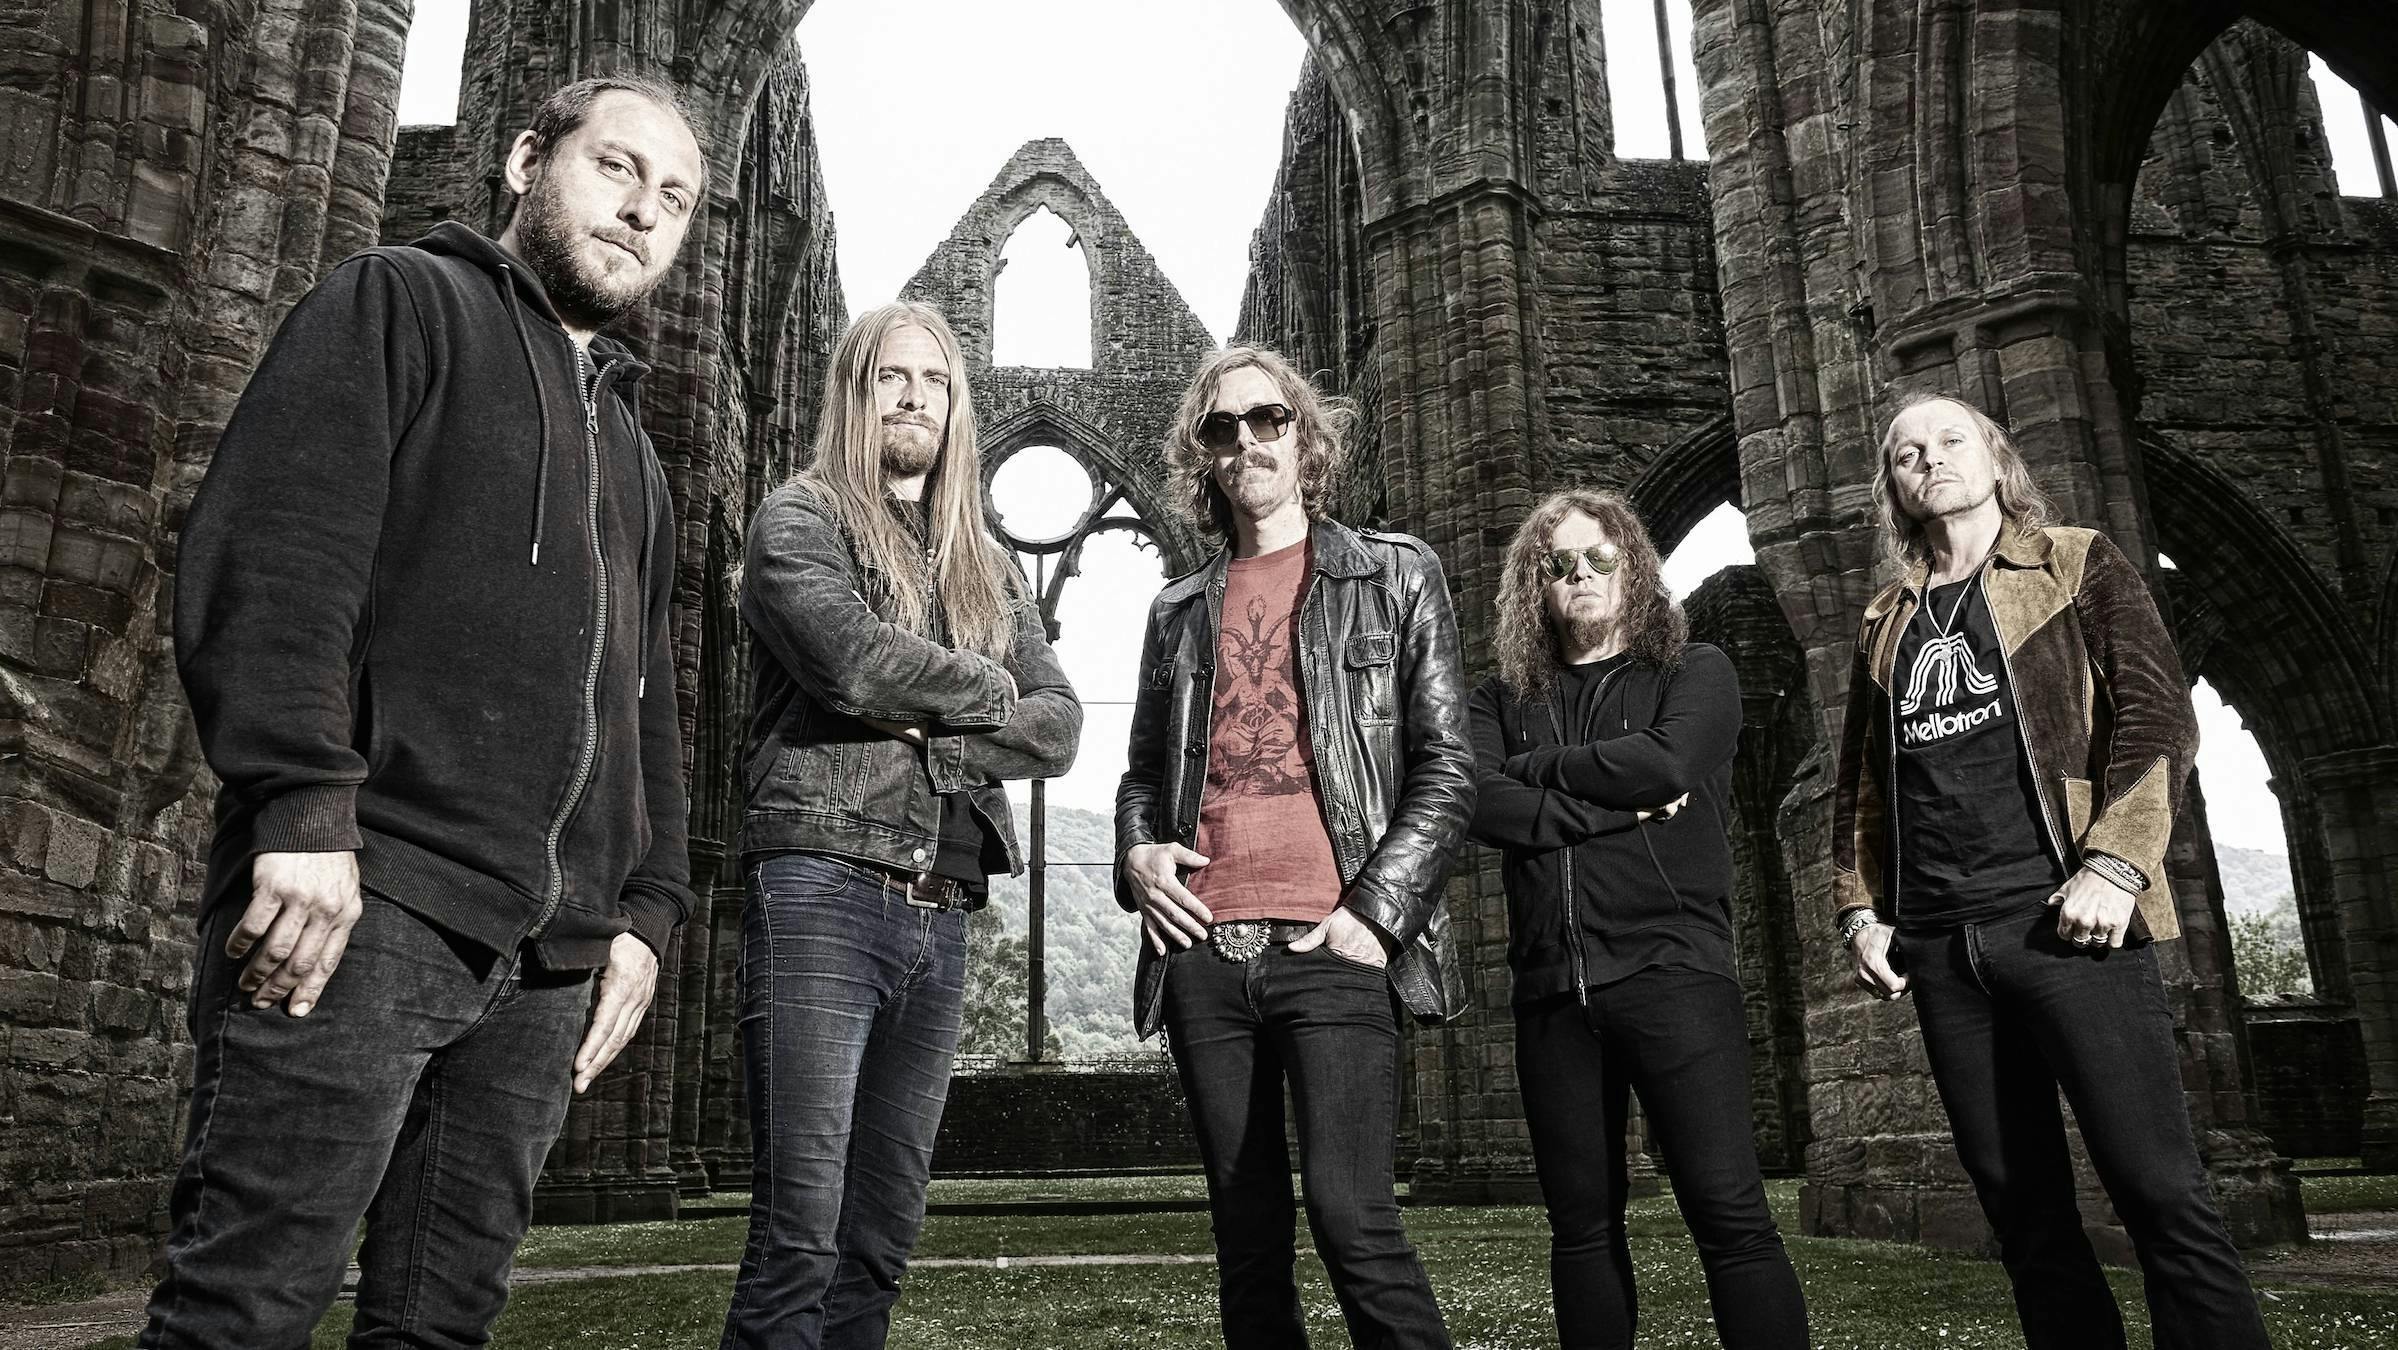 Damnation Festival Announces Headliners Opeth Plus Eight More Bands